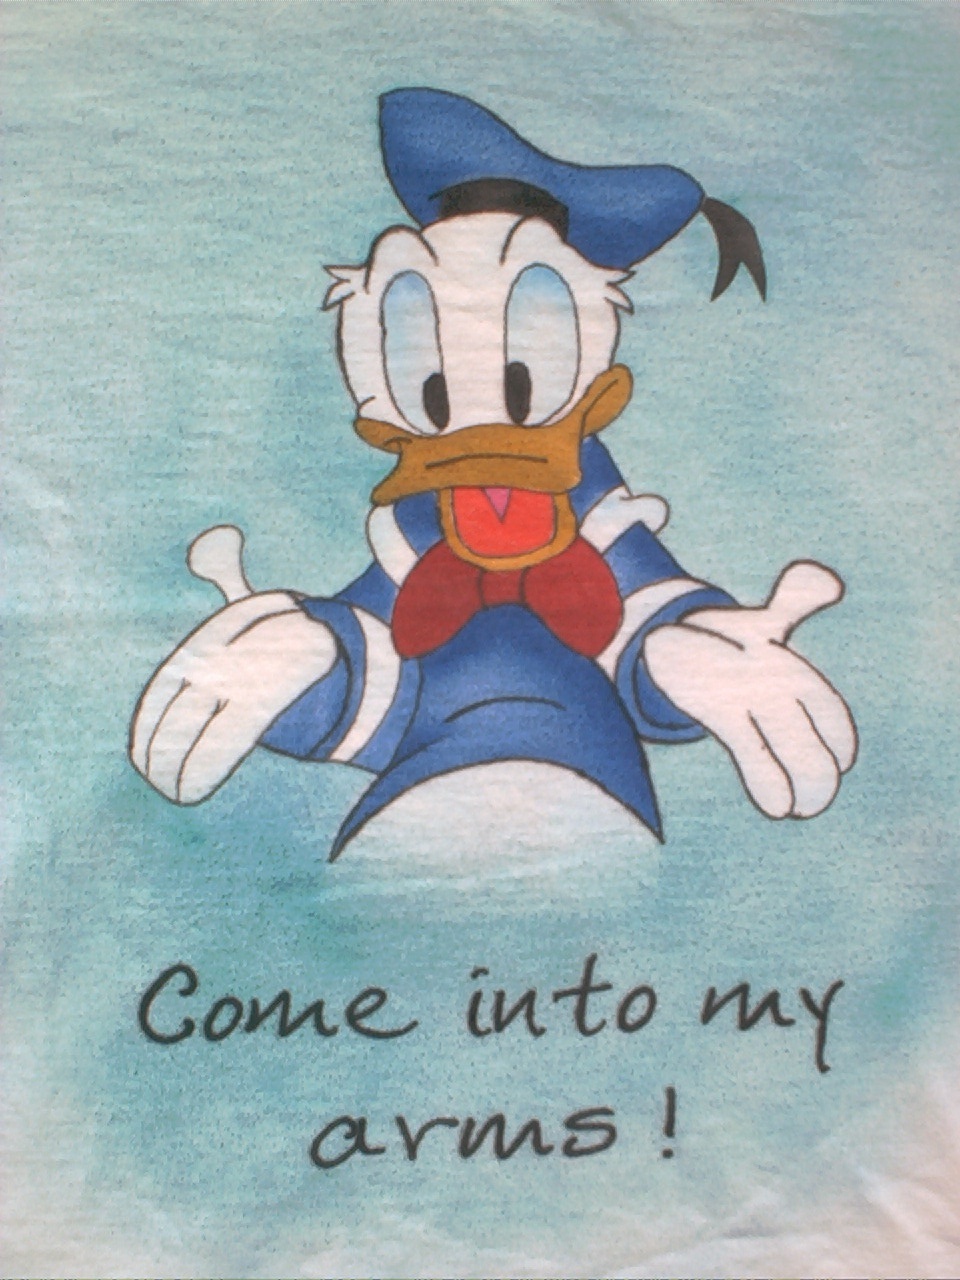 Donald Duck in love front.closeup